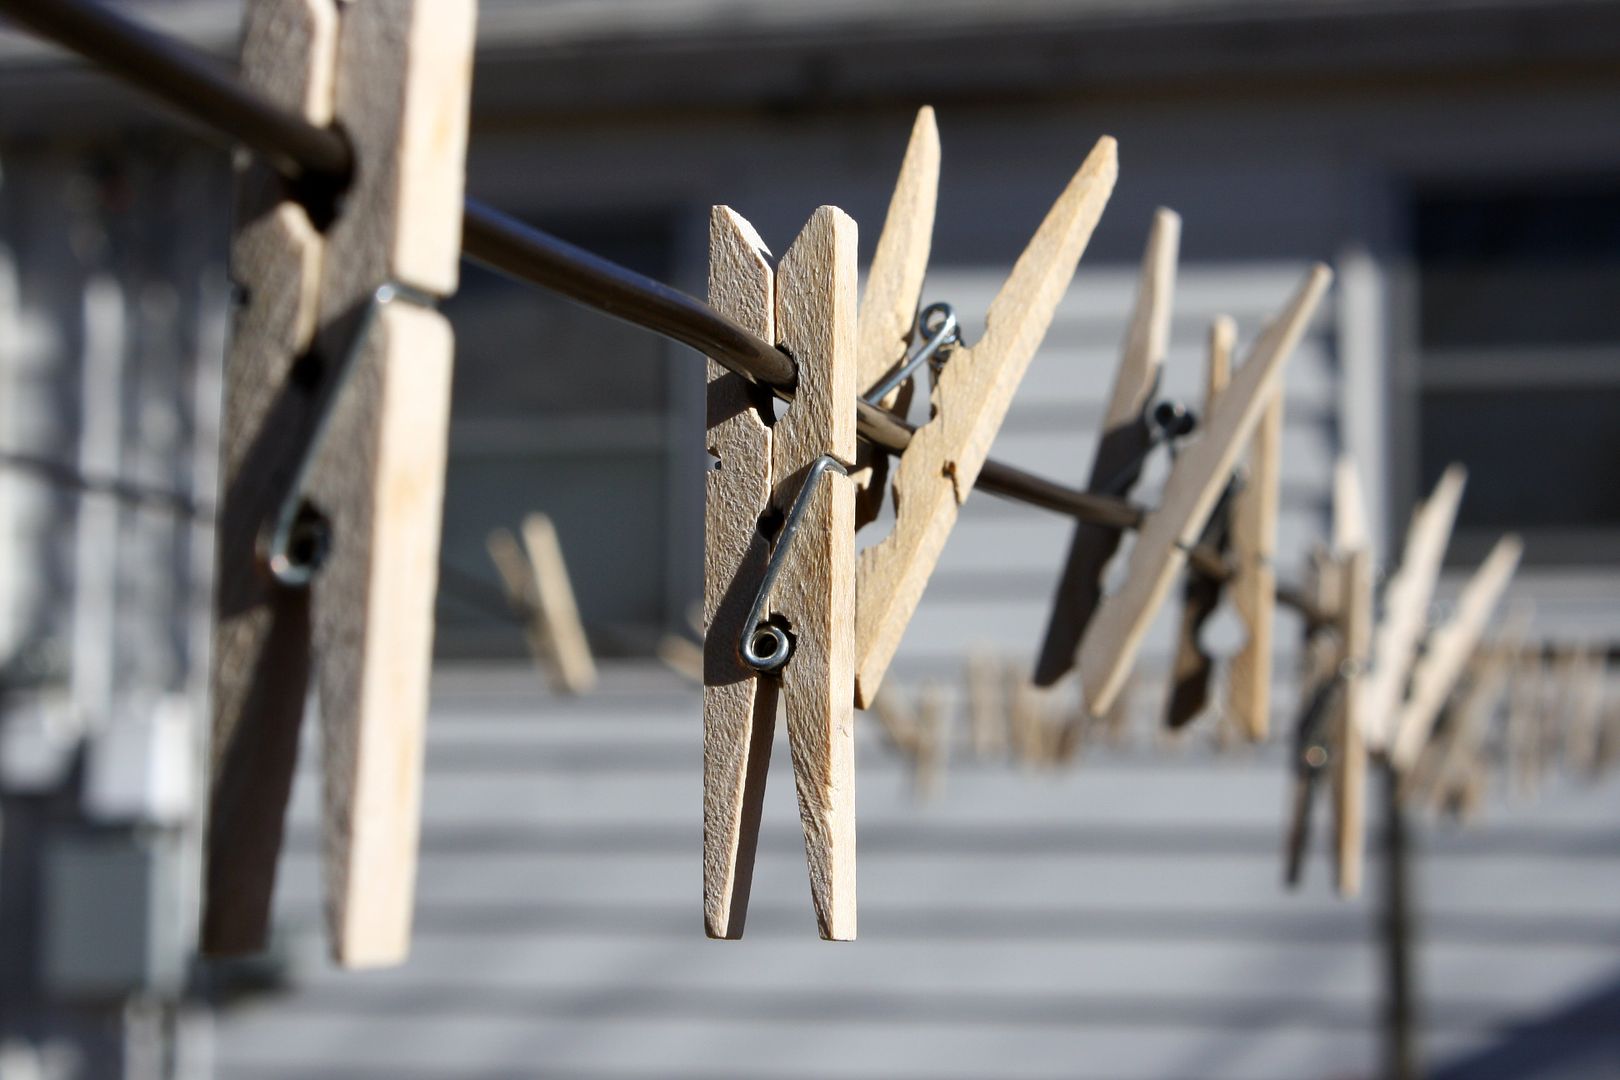  photo wooden-clothespins-on-clothes-line_zpsanuhdqsy.jpg